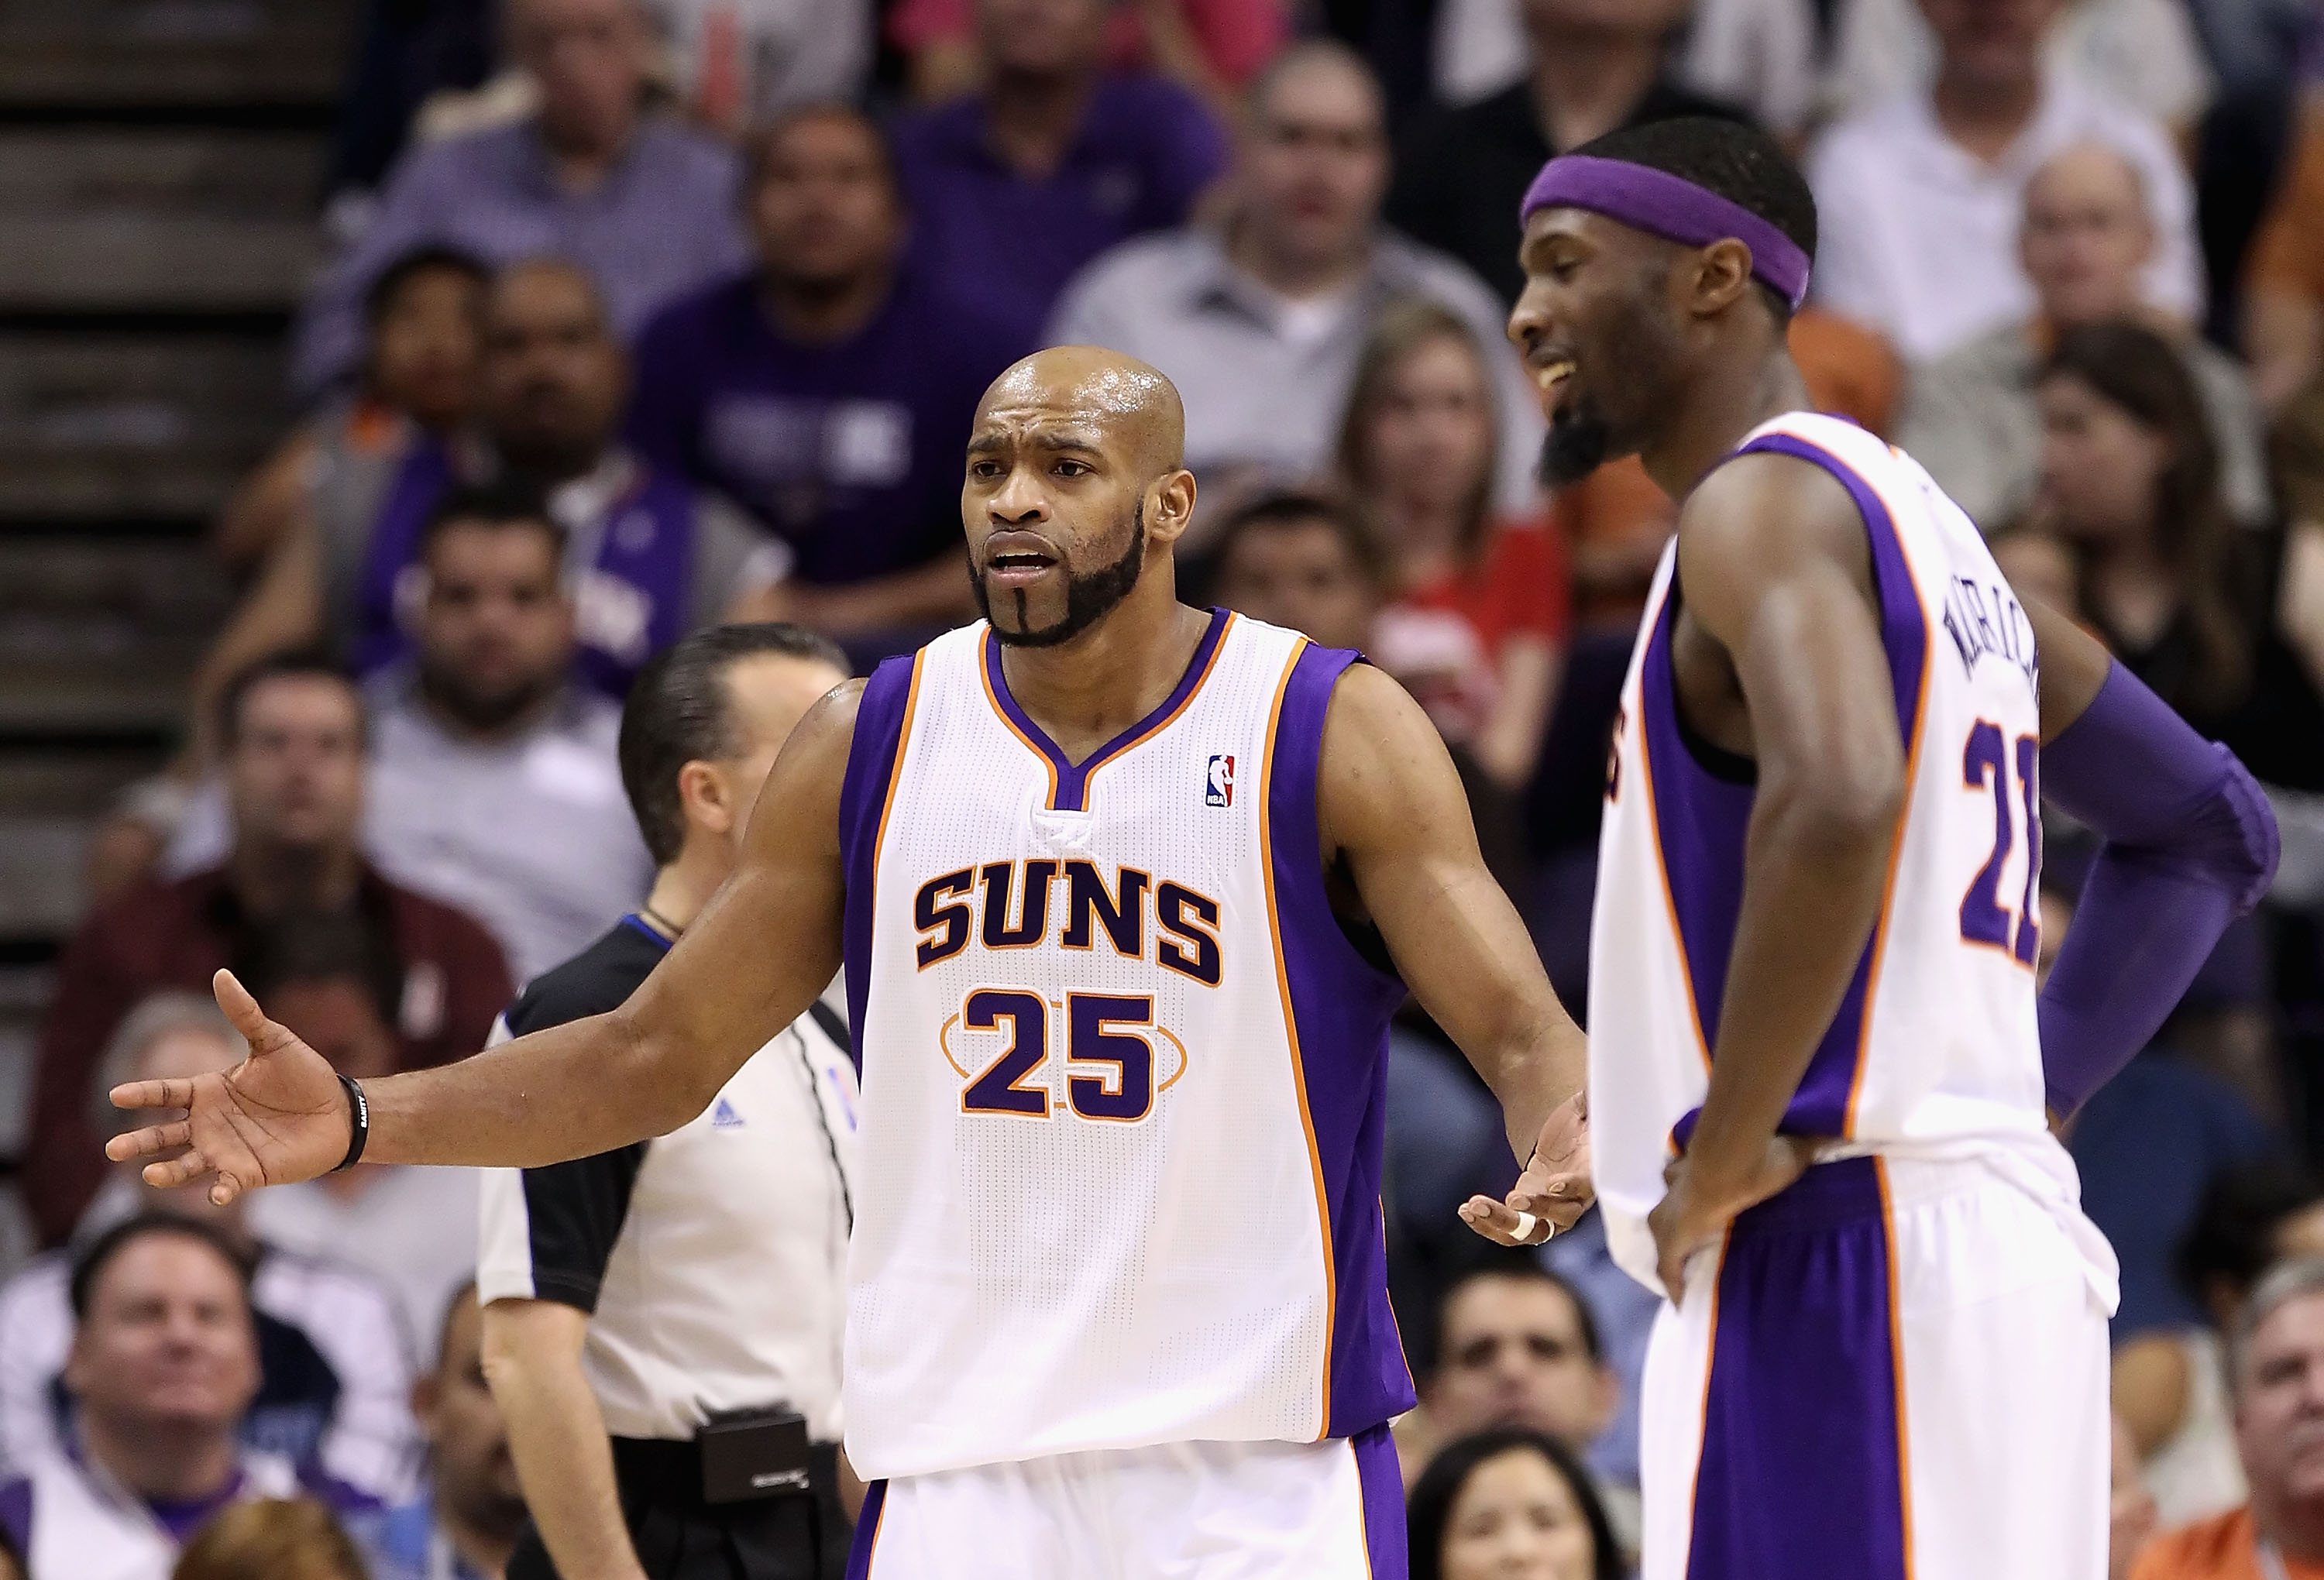 SPORTY STREETER: Should Vince Carter's Raps jersey be retired?